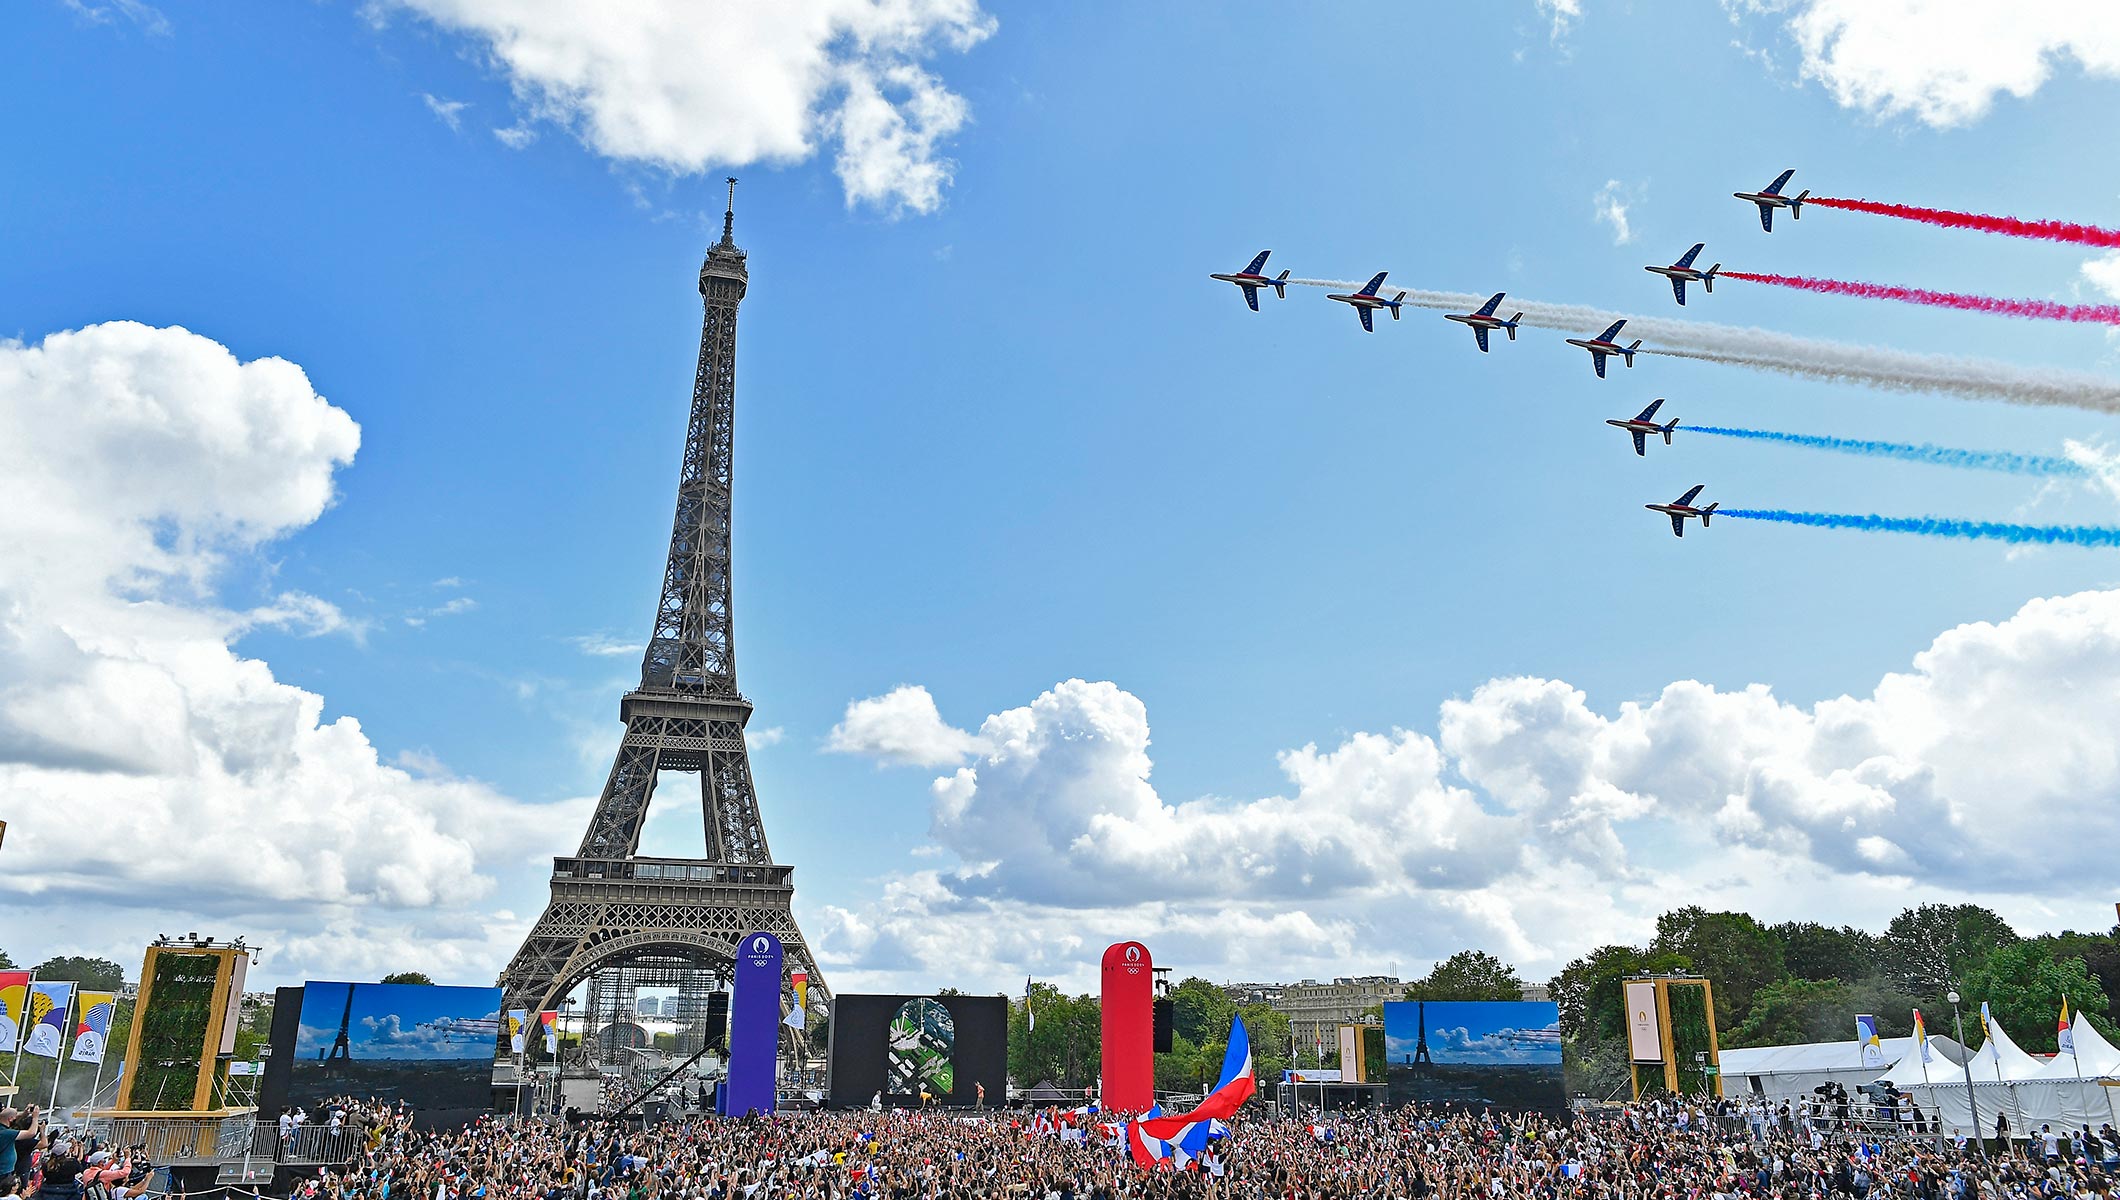 Paris 2024 eyes €100m more from lower tier partners to meet